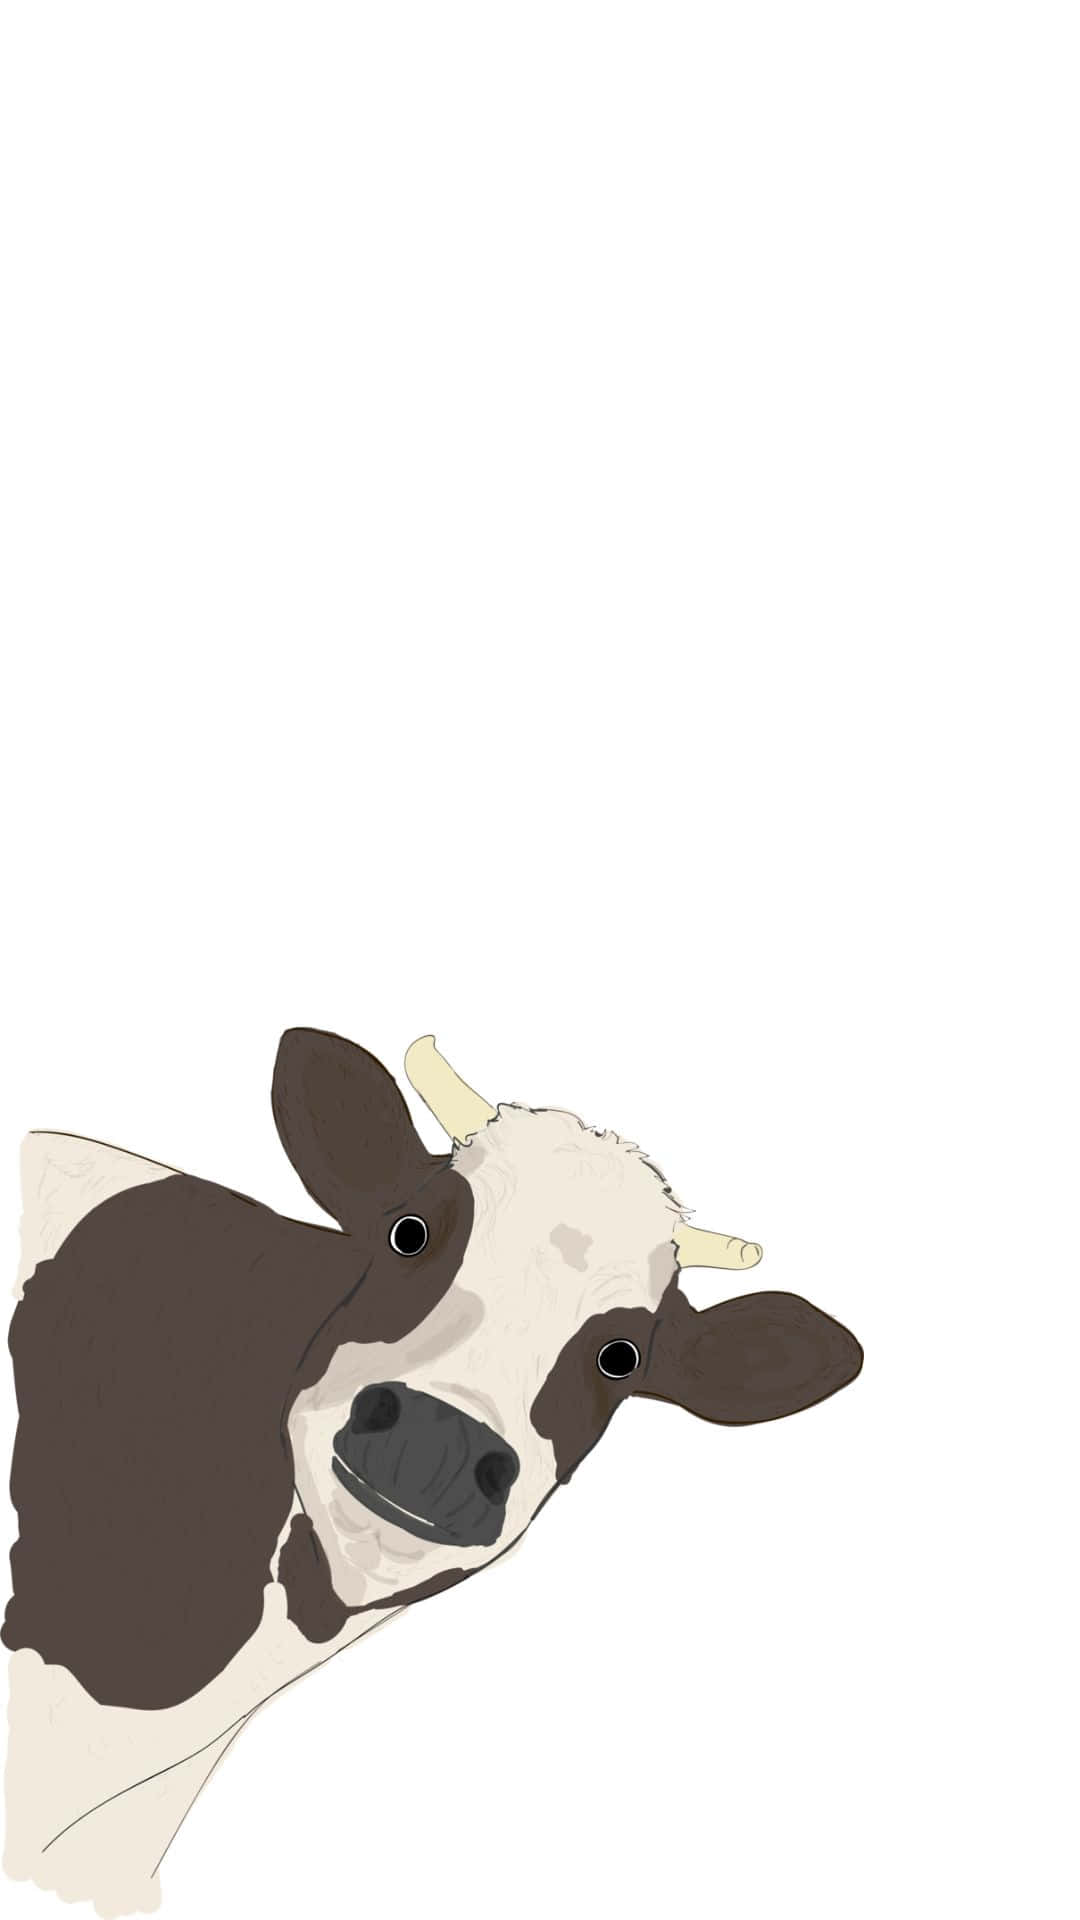 A Cow Is Looking Up Wallpaper